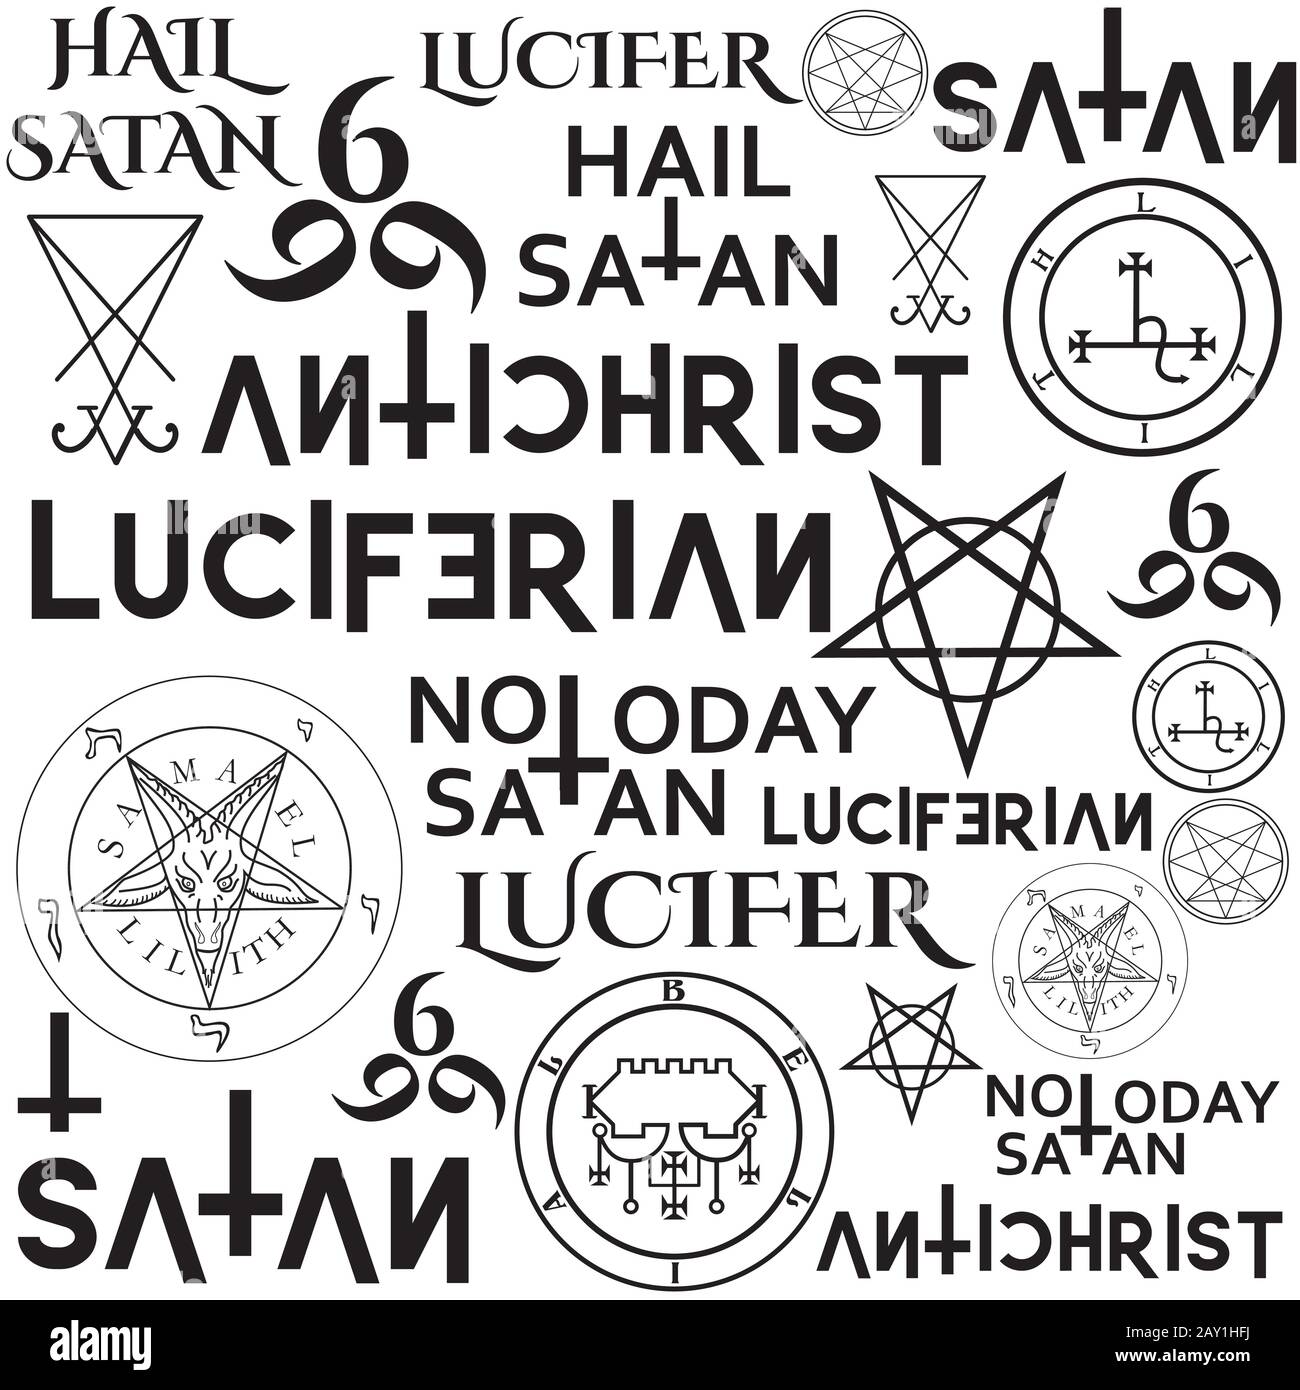 Wiccan symbols and sigils background Stock Vector